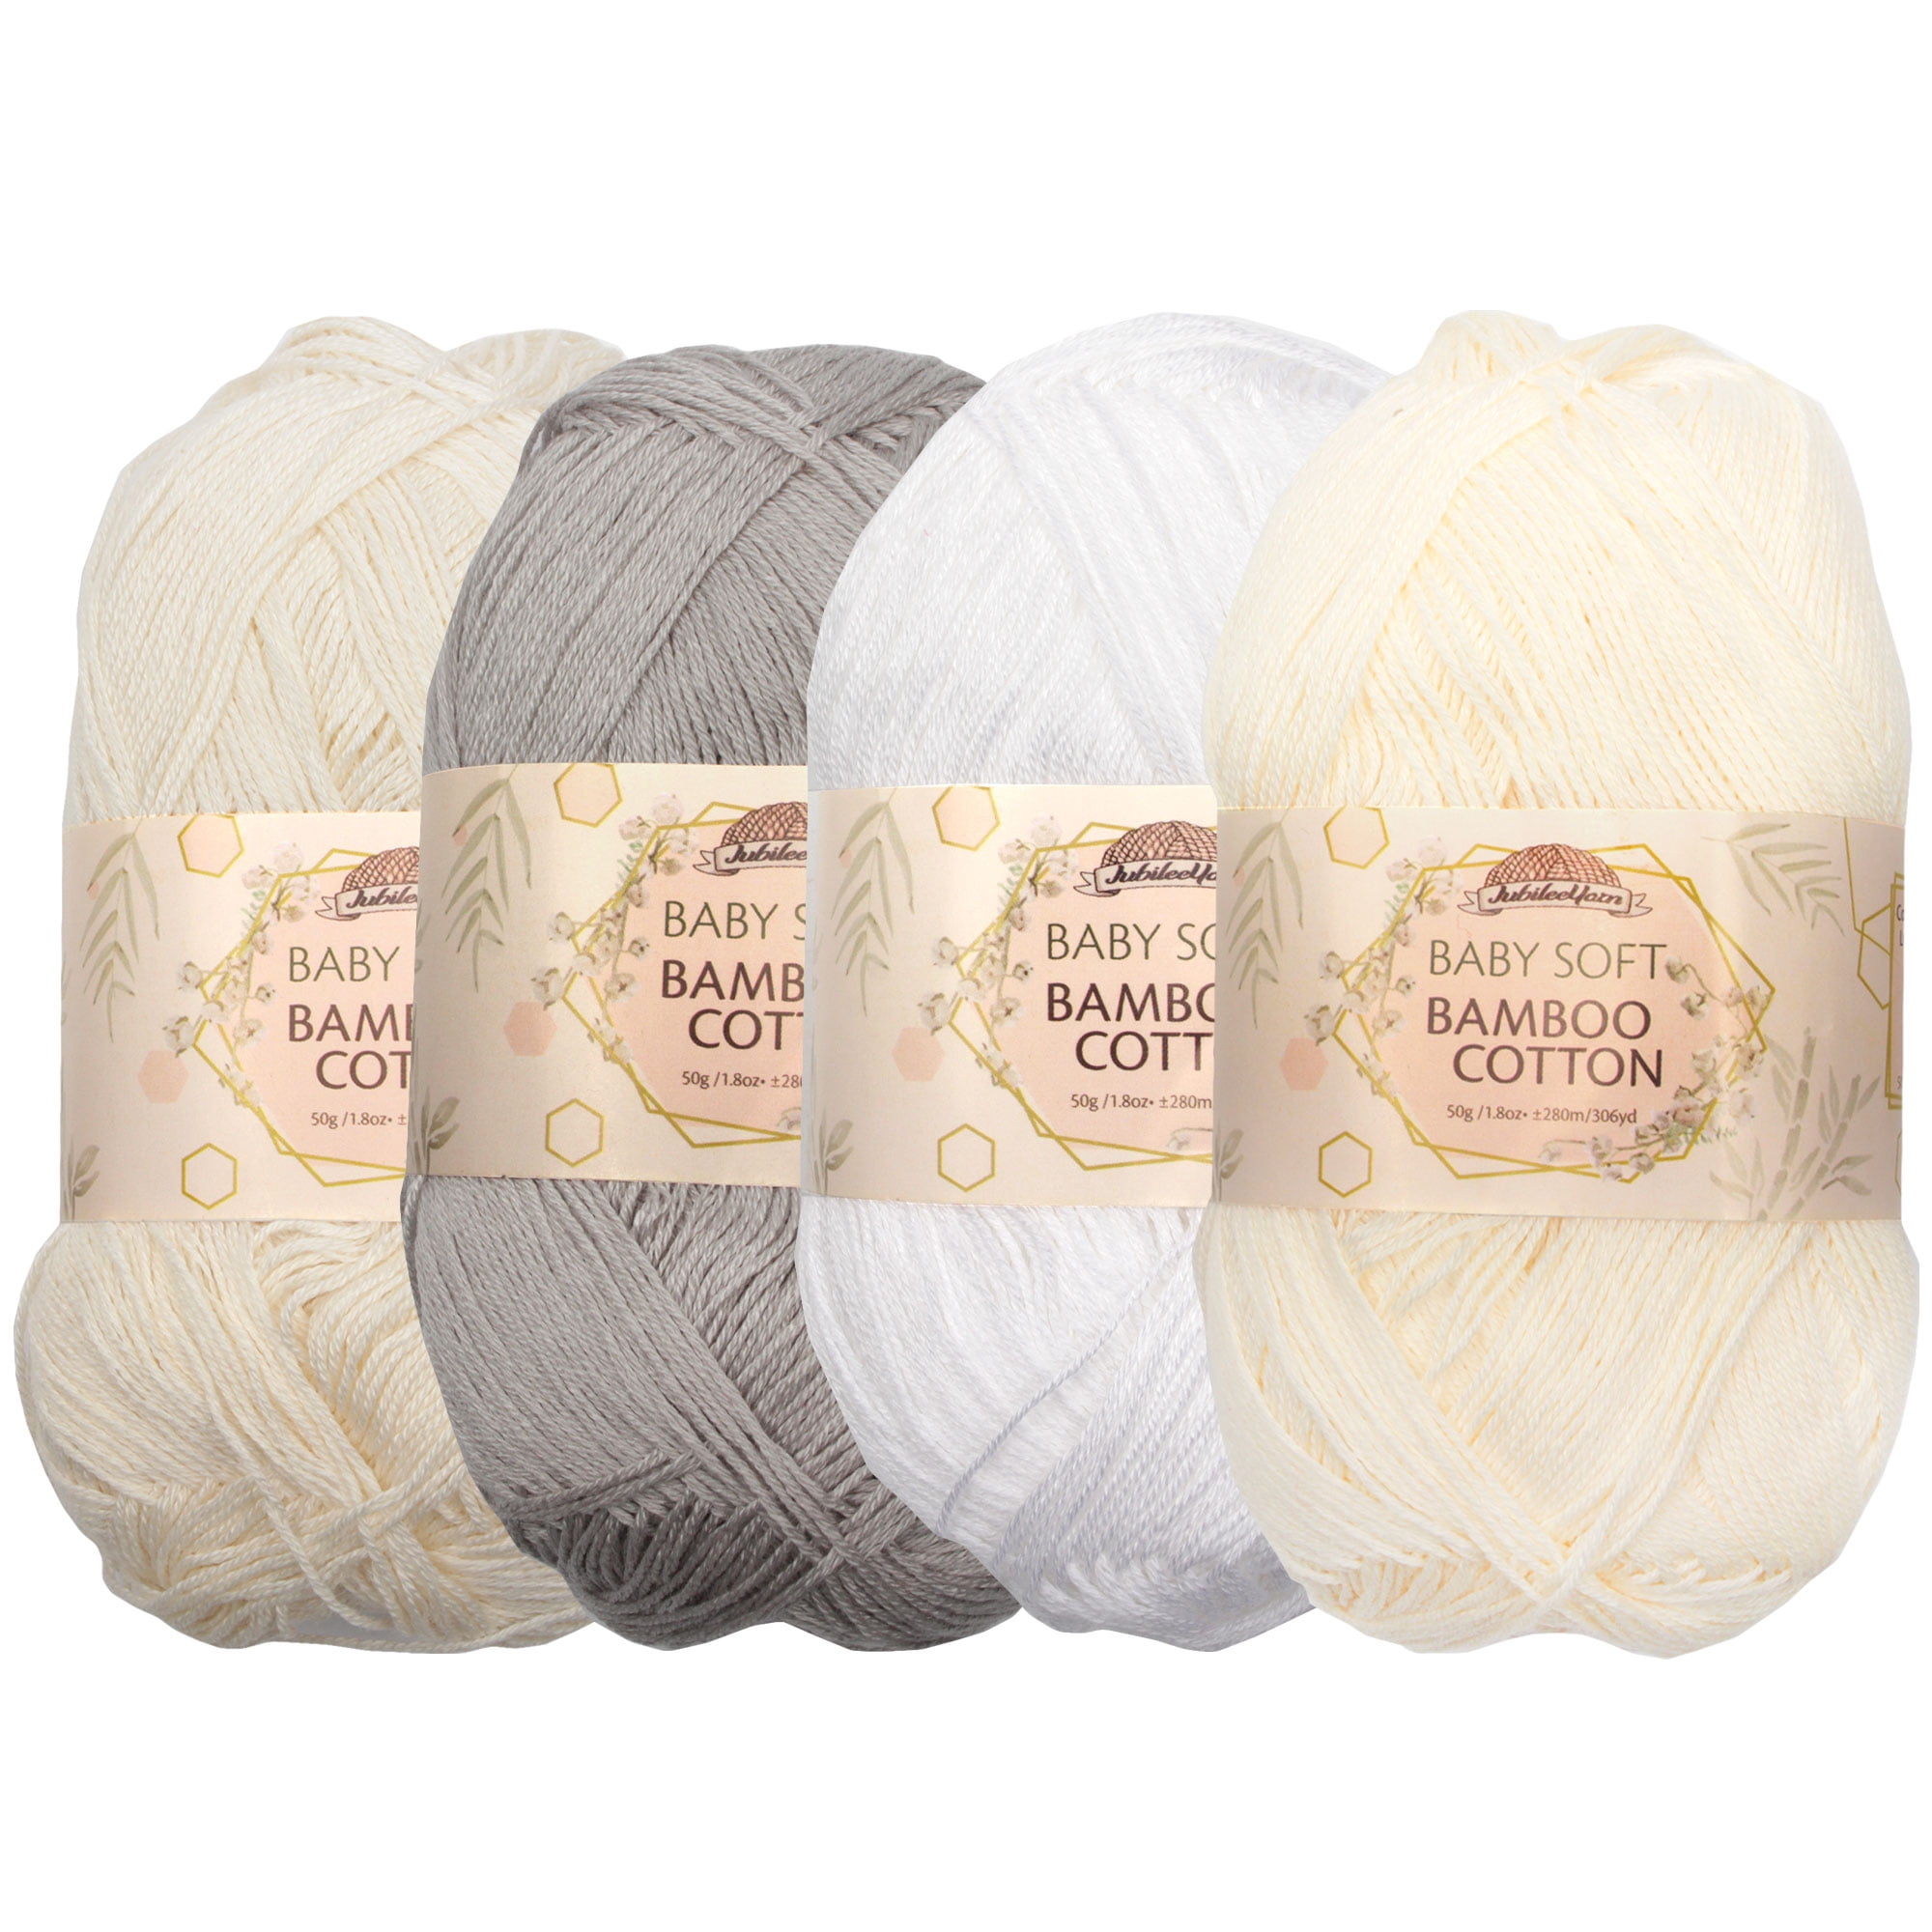 JubileeYarn Baby Soft Bamboo Cotton Yarn - Shades of Neutral Colors - 4  Skeins